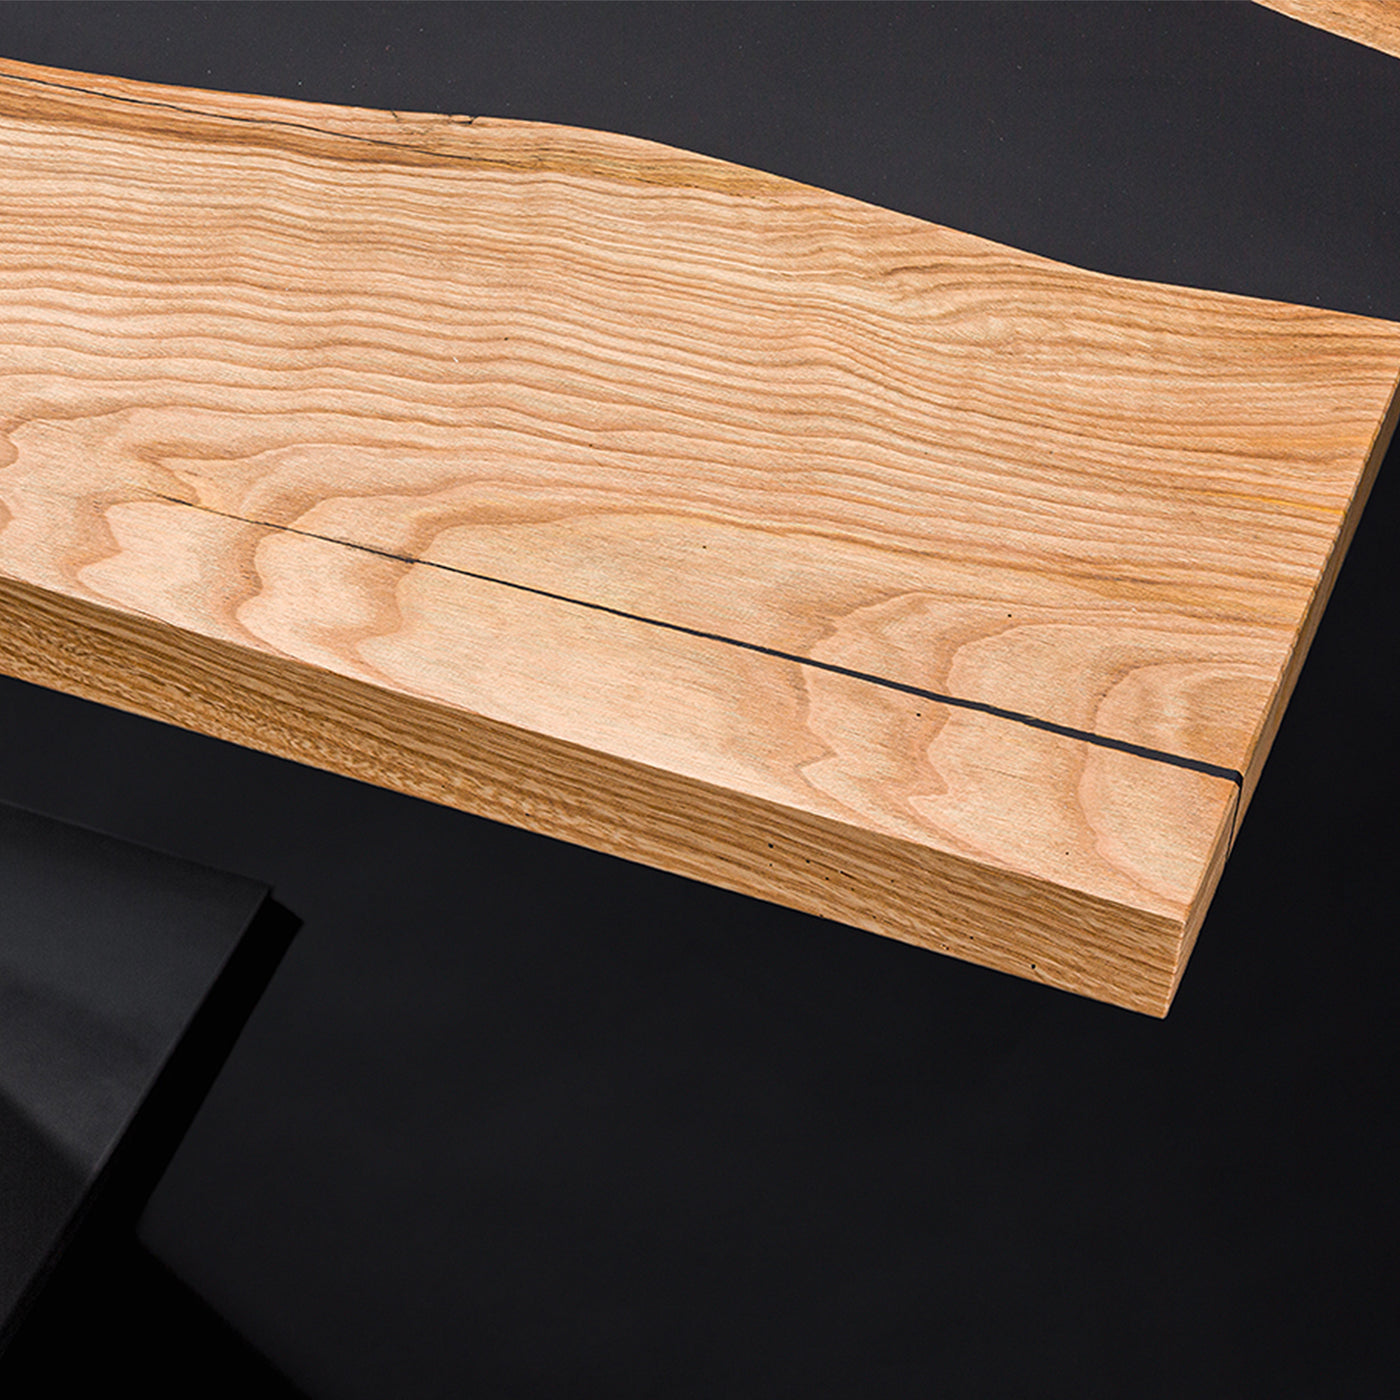 Chestnut and resin dining table - Alternative view 3